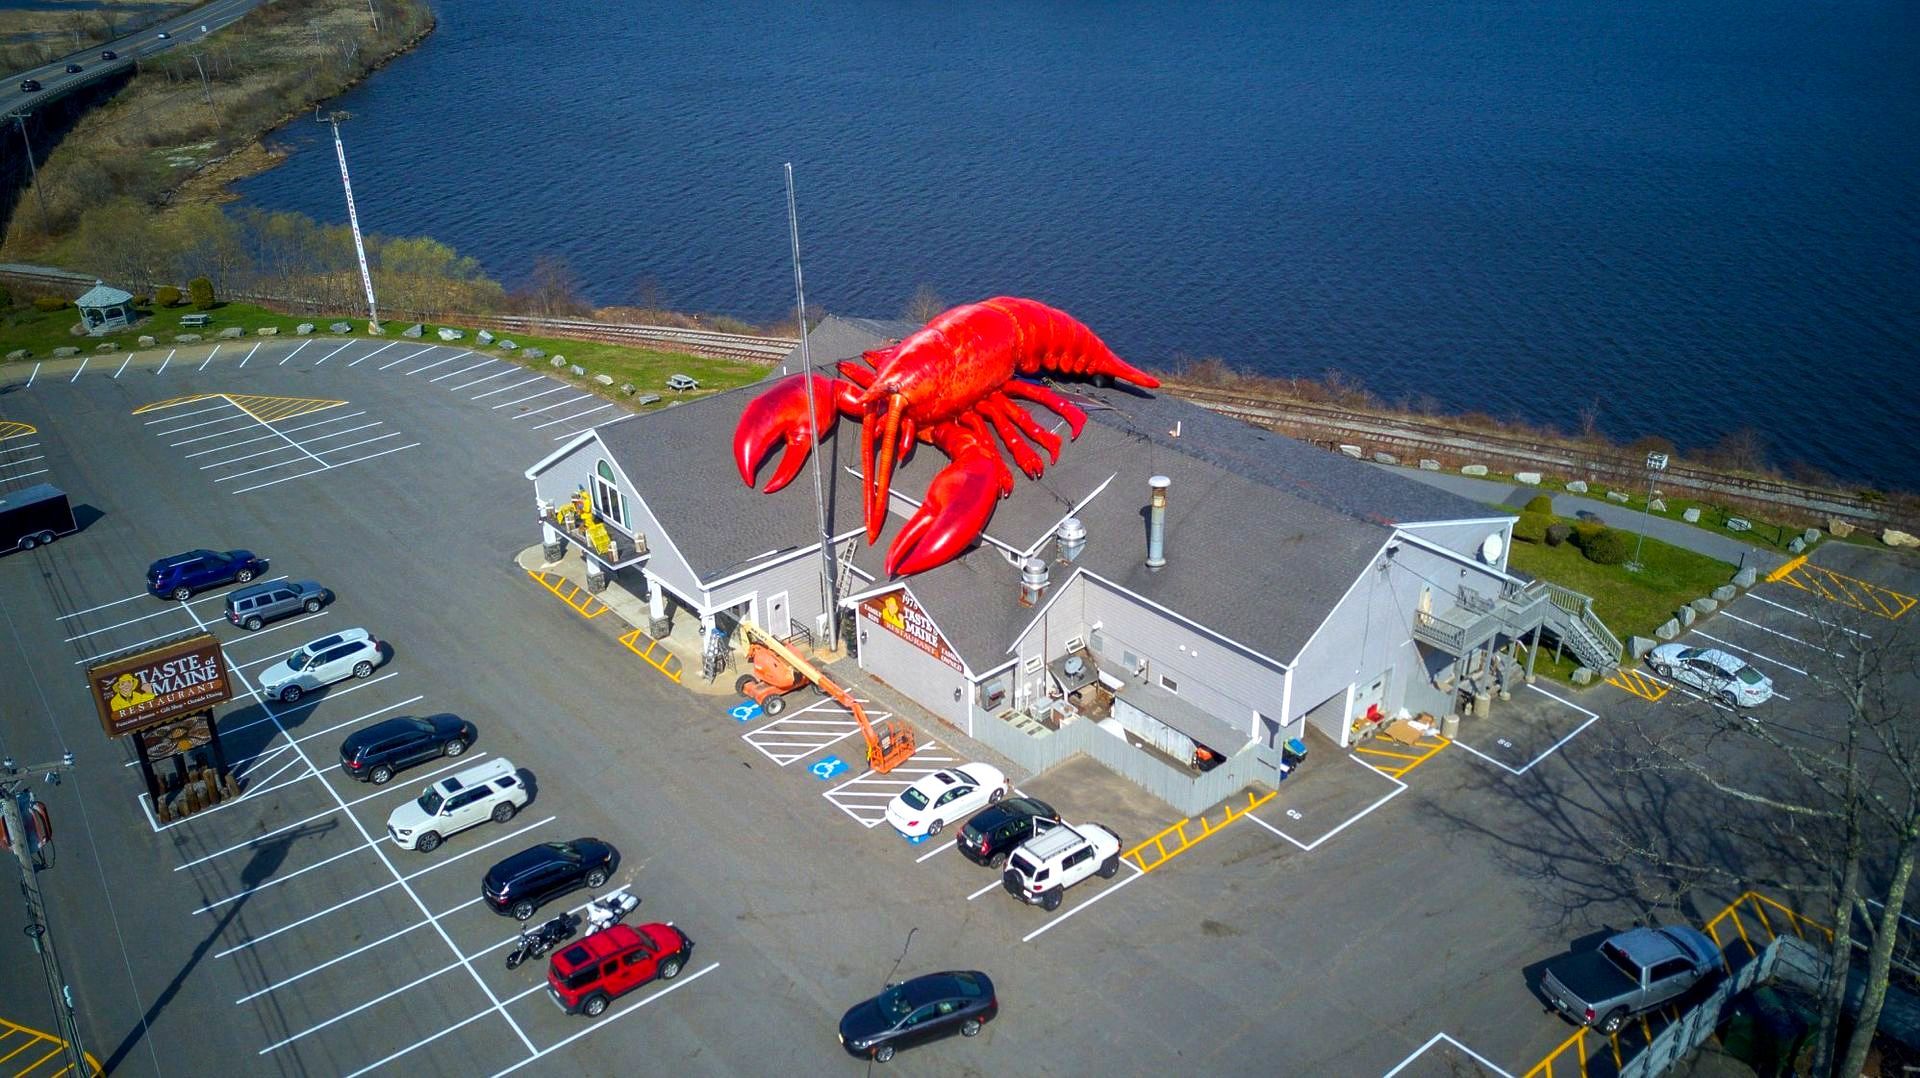 World’s Largest Inflatable Lobster, world record in Woolwich, Maine
